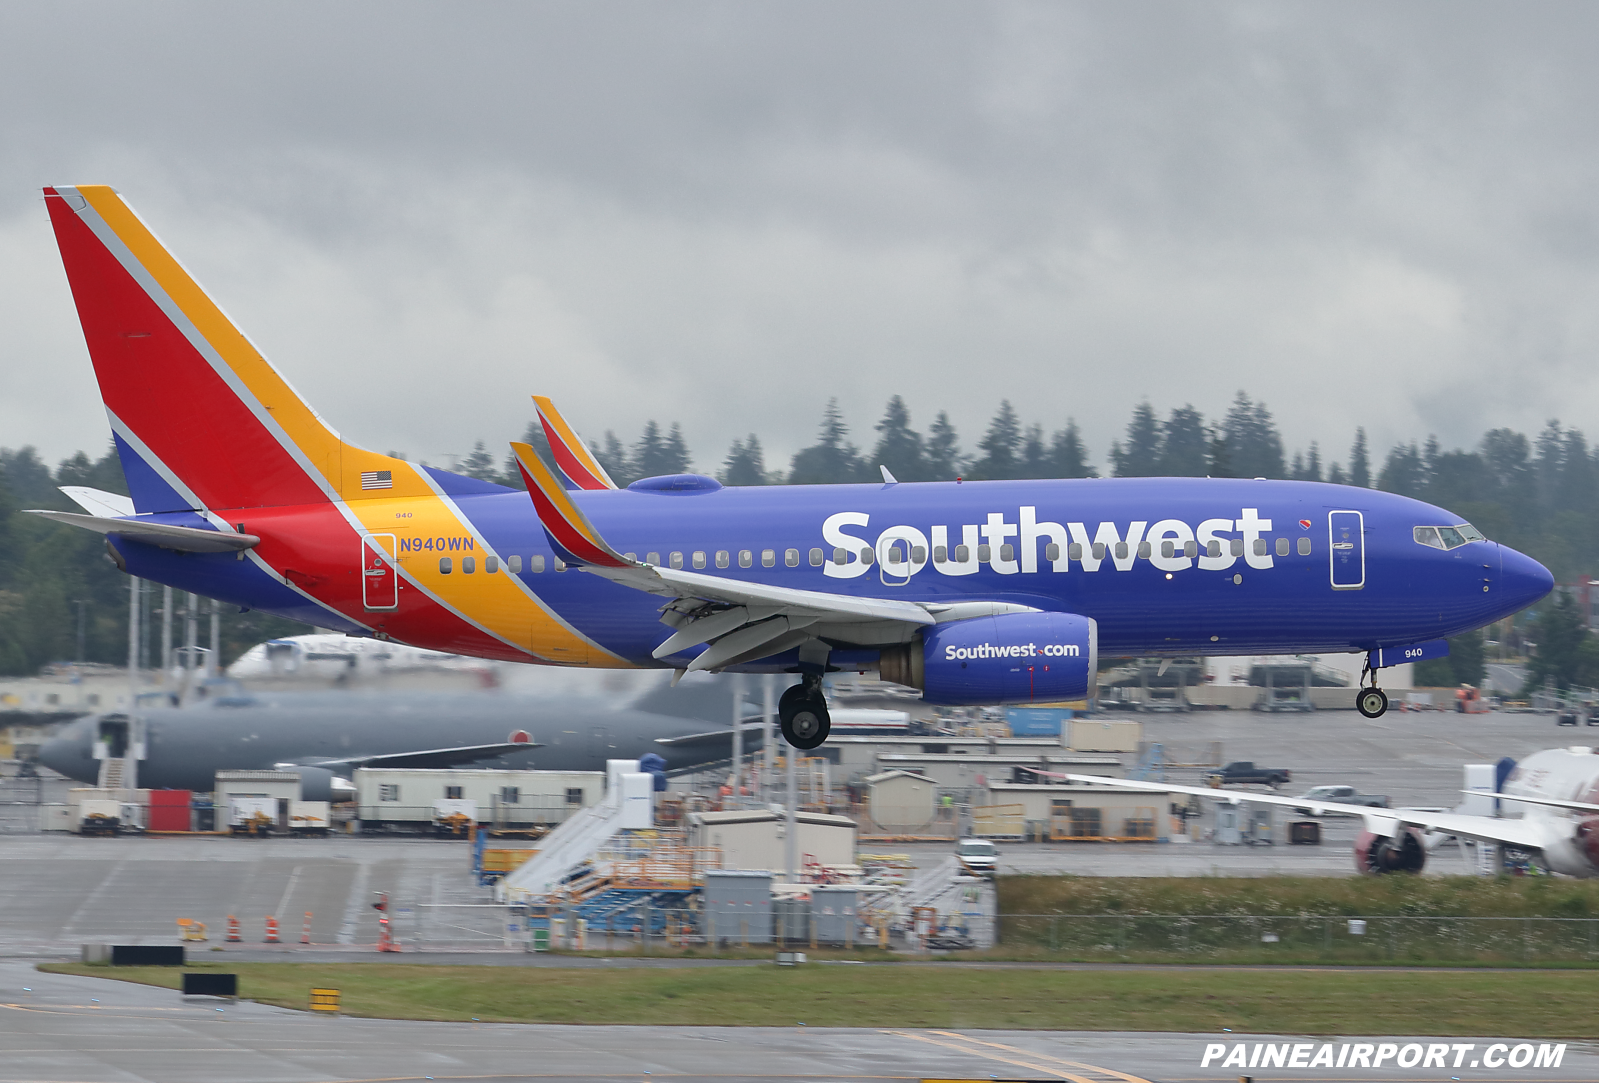 Southwest Airlines 737 N940WN at KPAE Paine Field